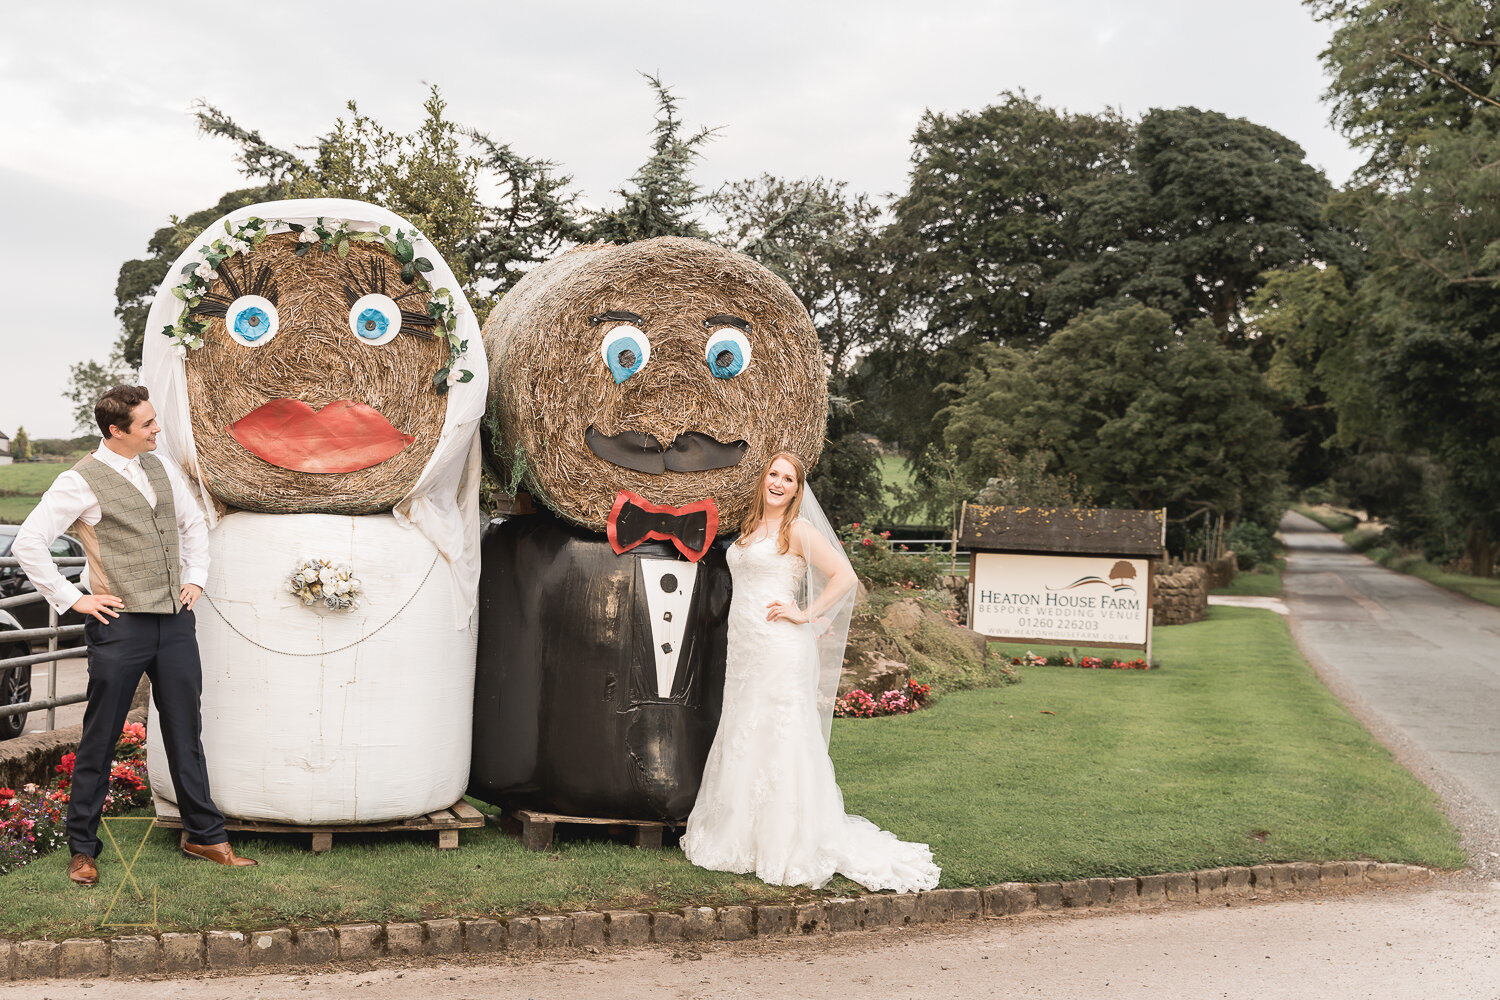 Bride-and-groom-with-Heaton-House-Farm-Mr-and-Mrs-Strawson